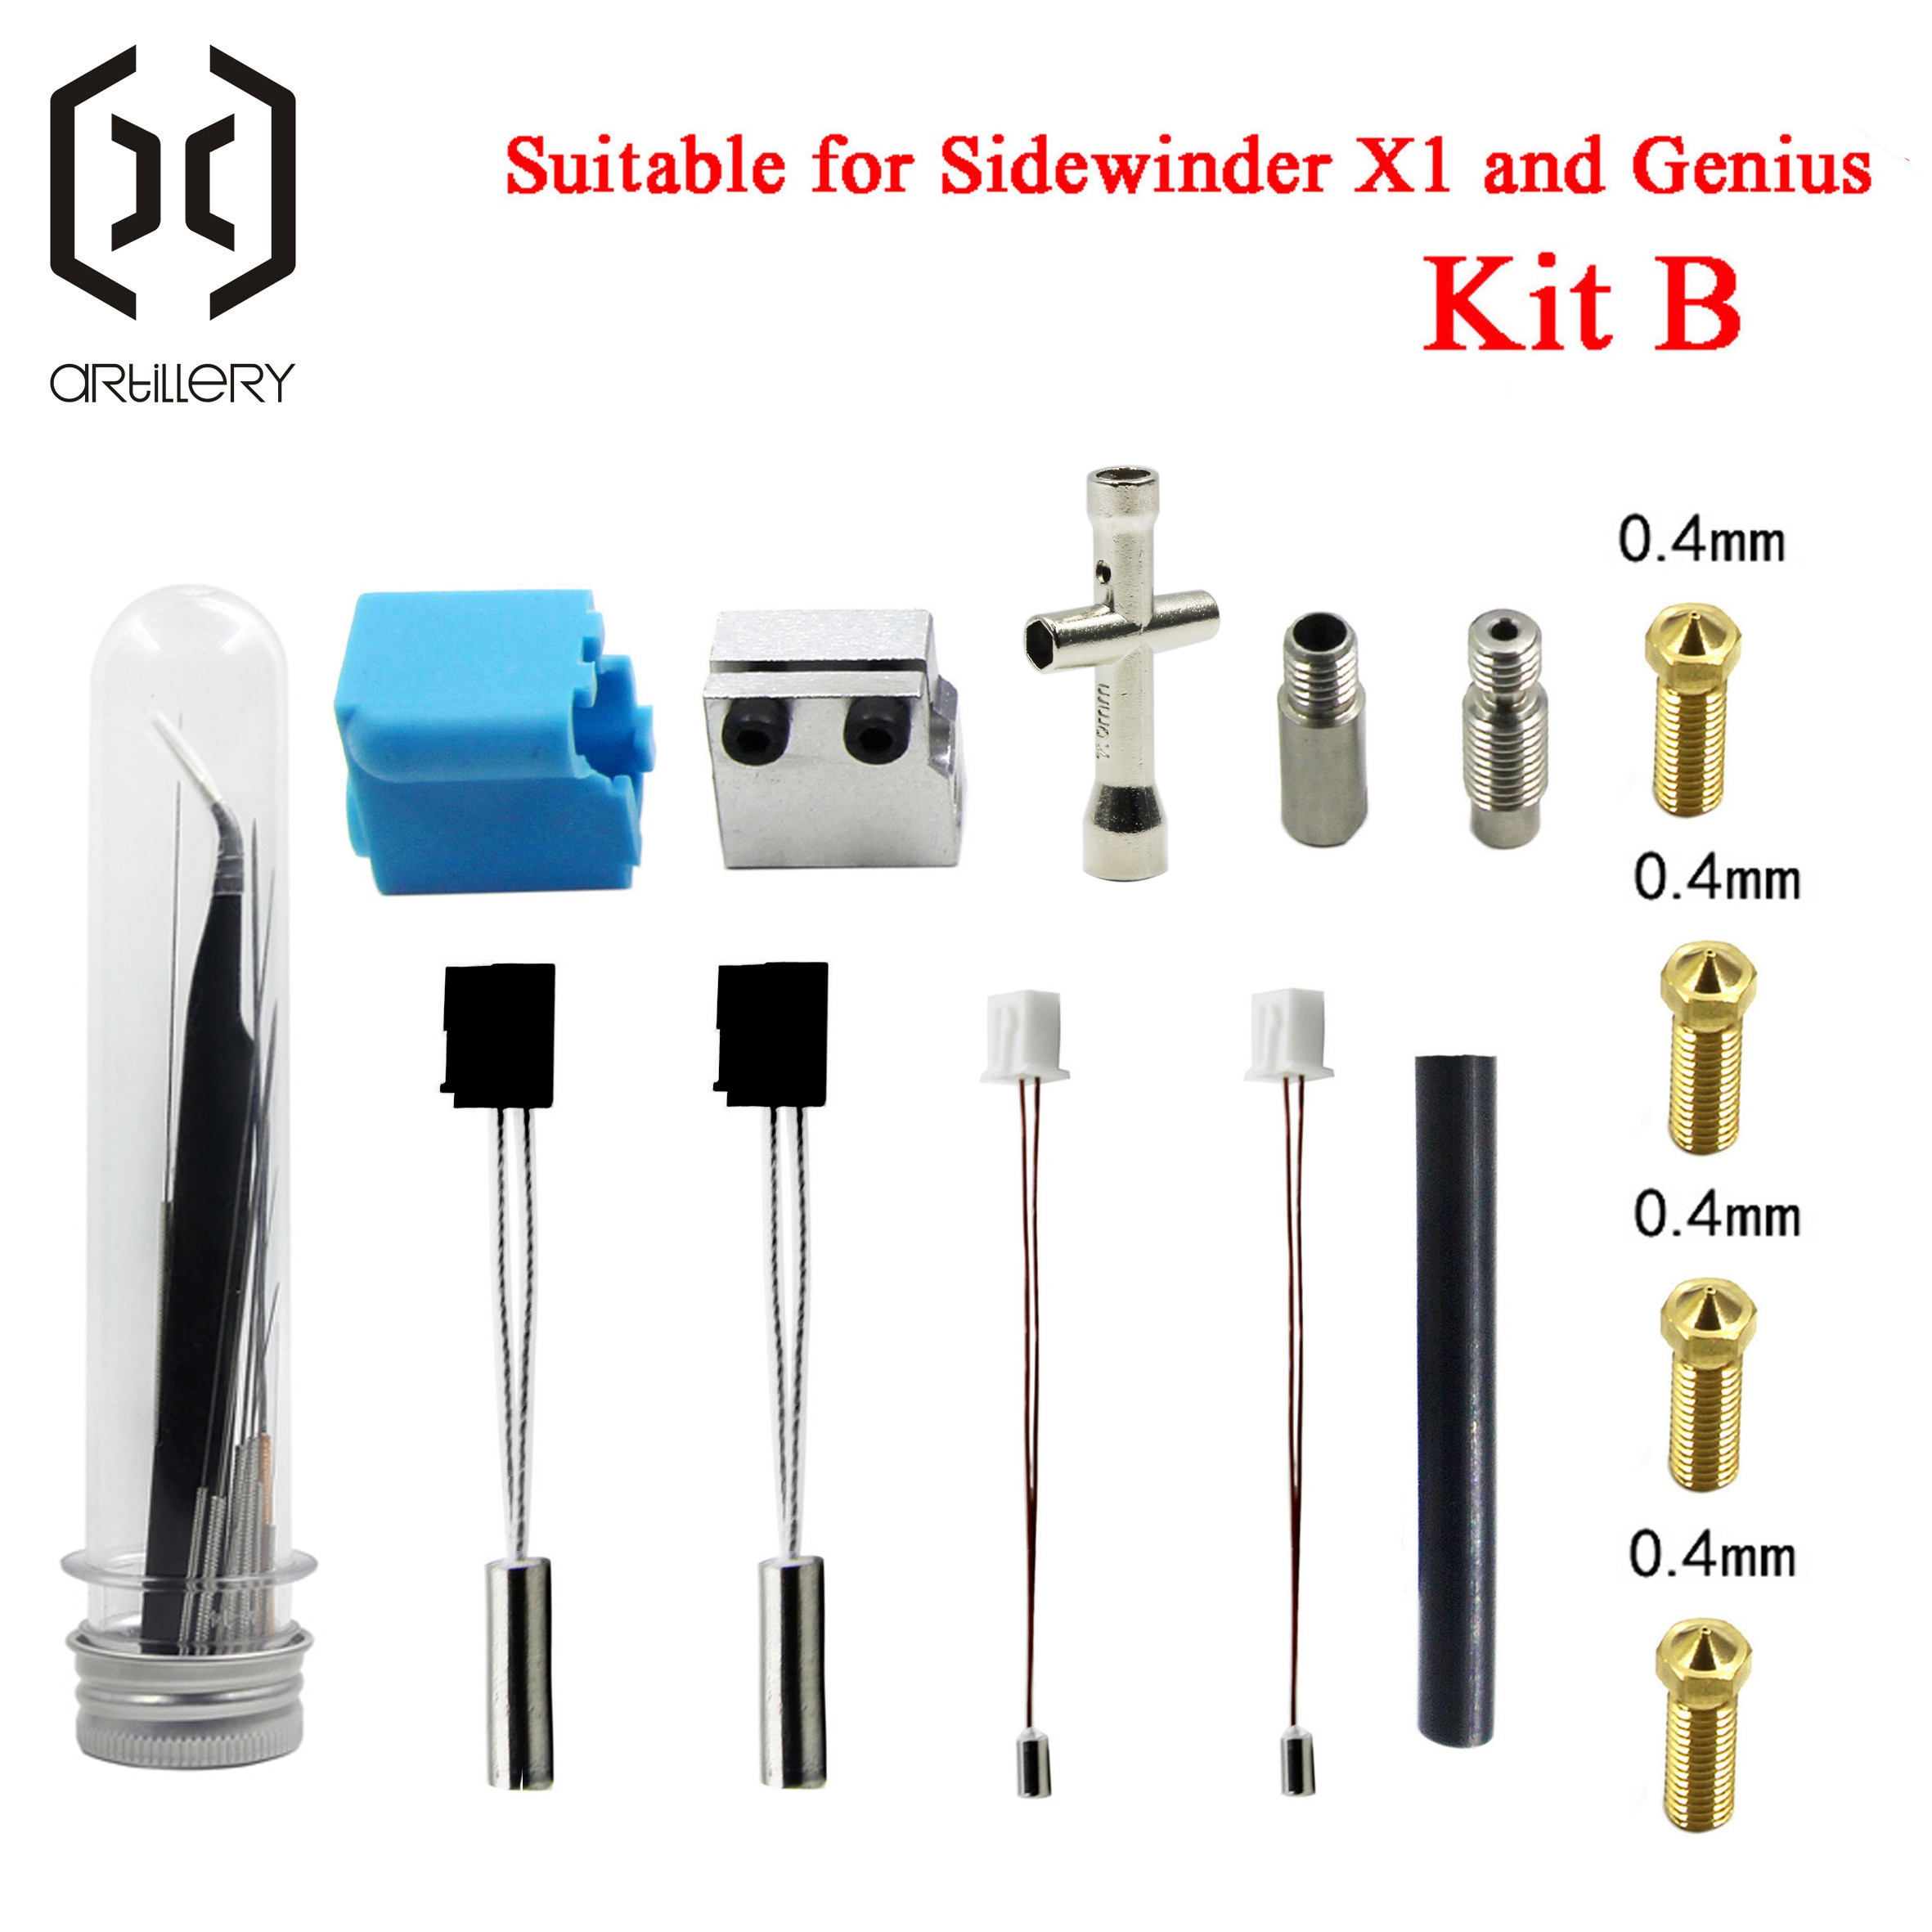 3D printer Artillery extruder Sidewinder X1 Genius and Hornet silicone nozzle kit heating block throat and thermistor idler arm: Kit B